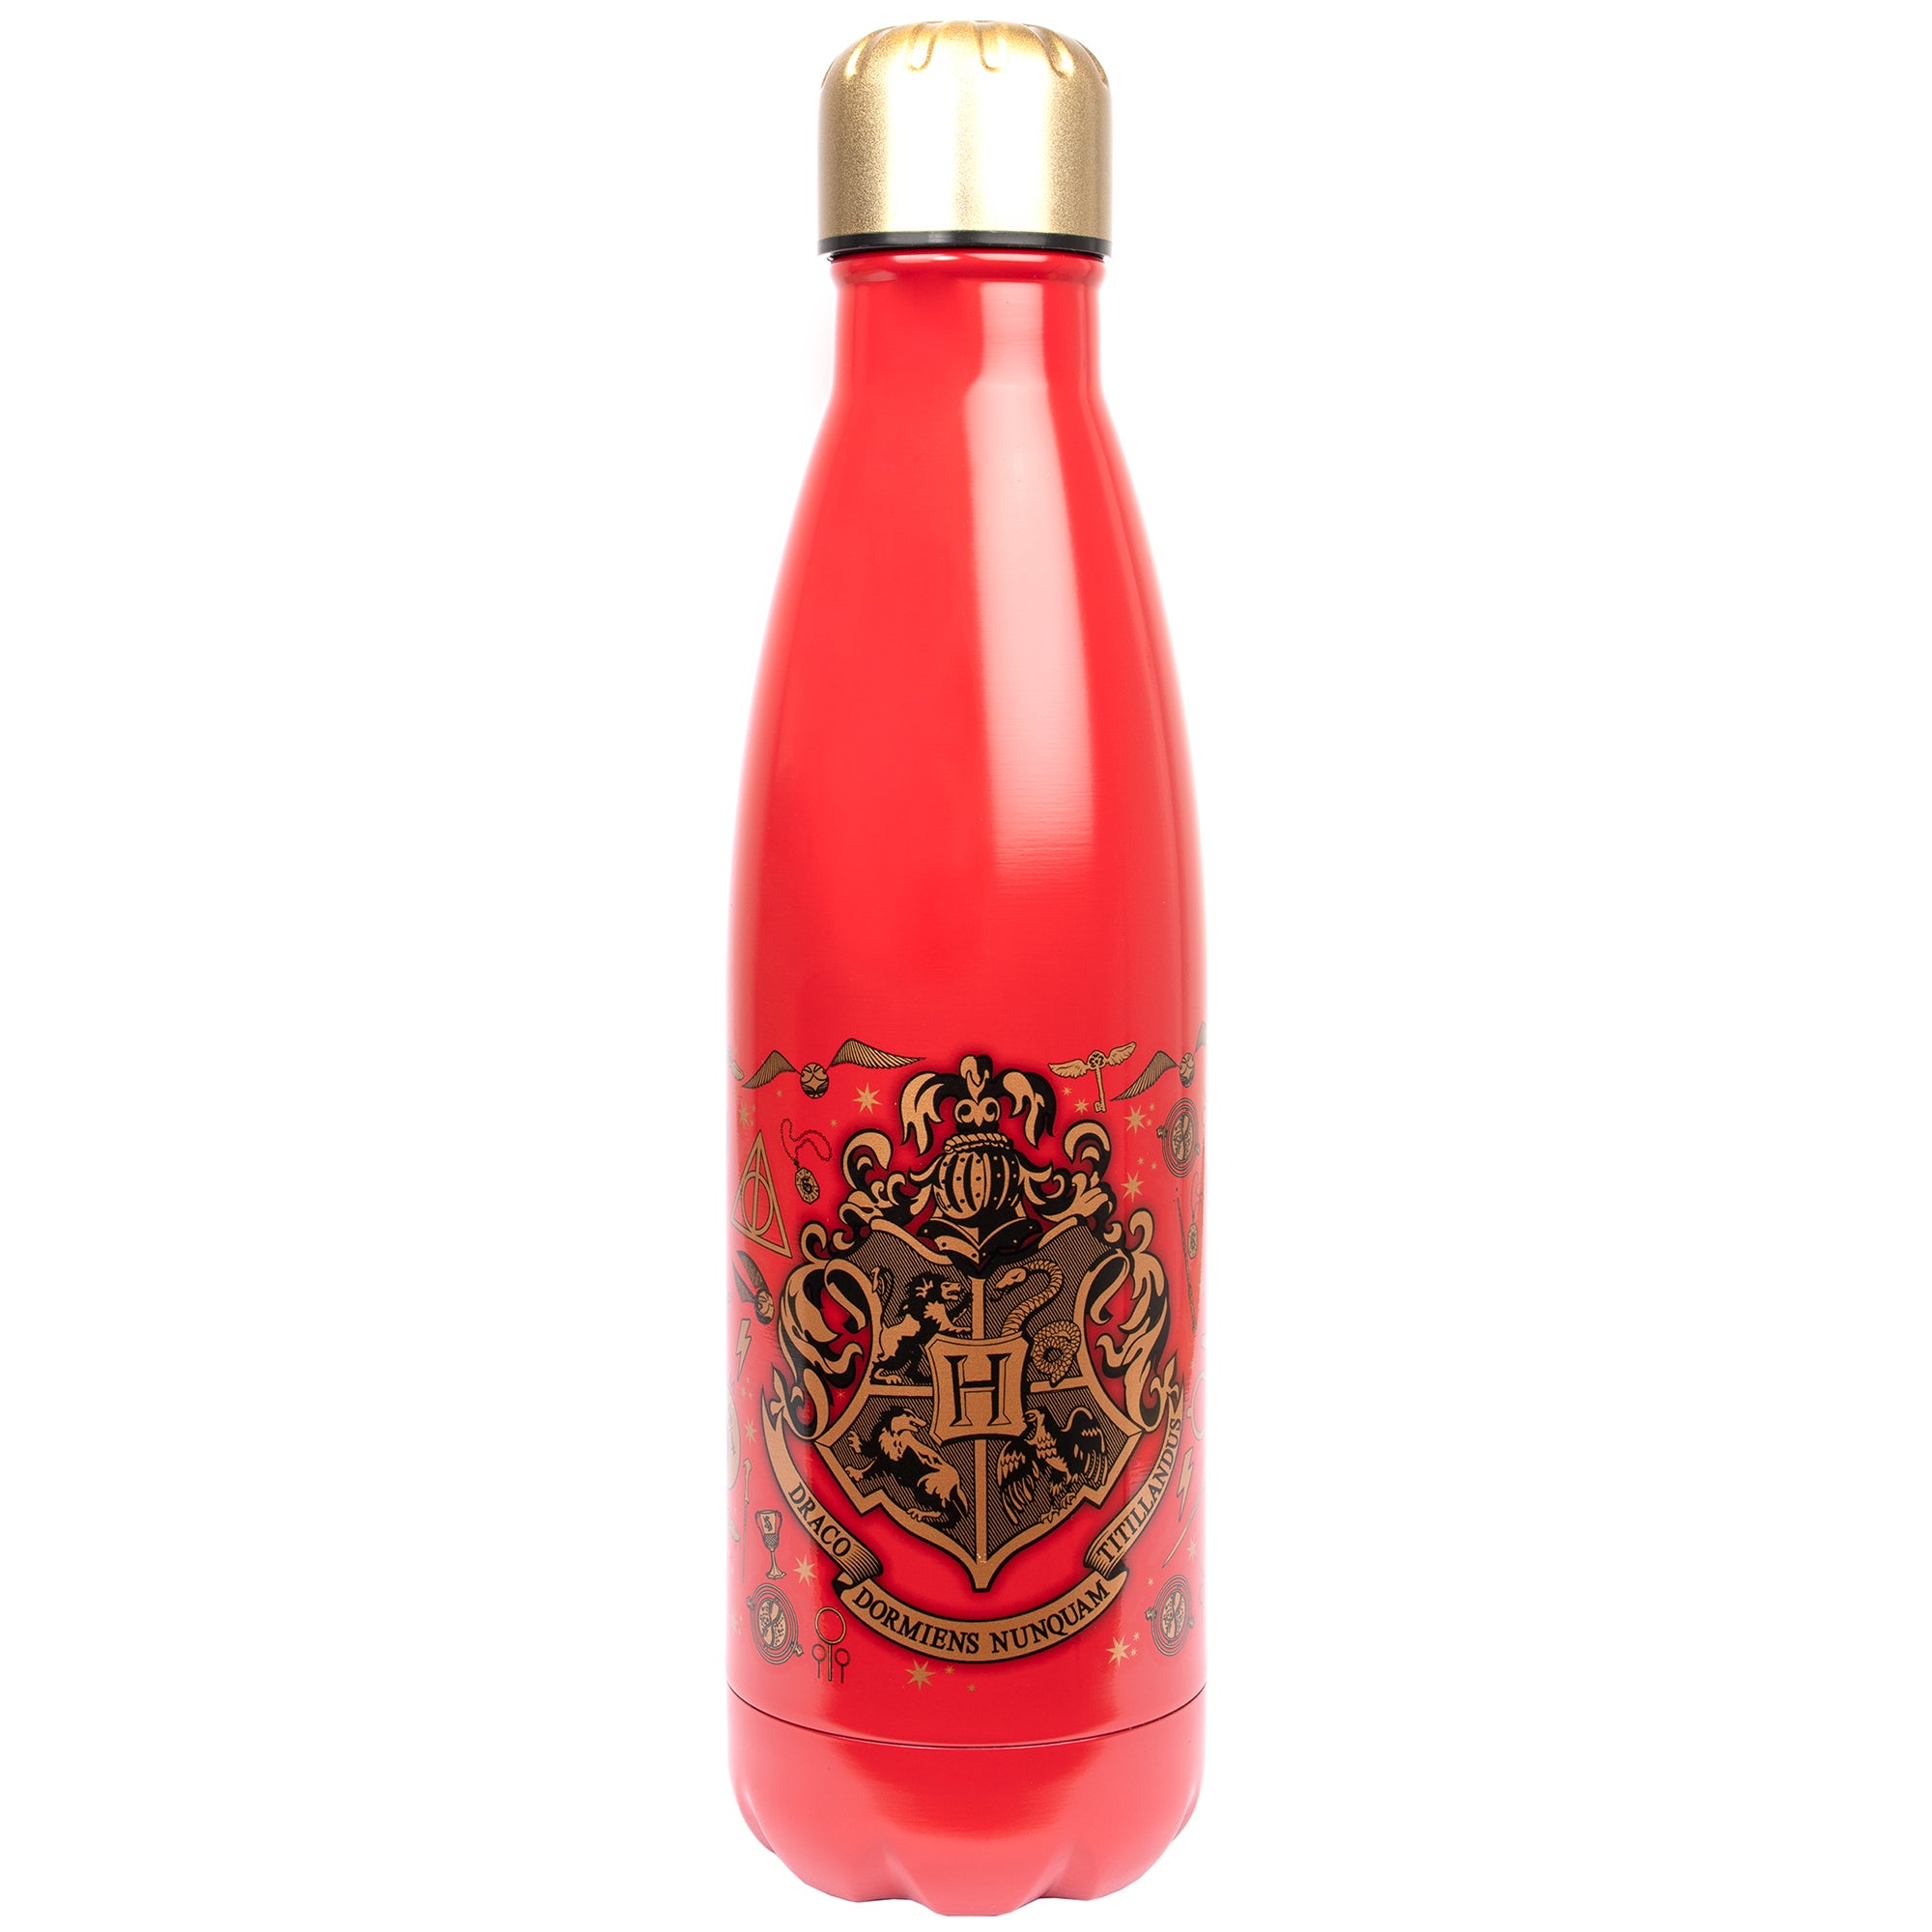 Harry Potter Gryffindor Stainless Steel Water Bottle 22 oz Carabiner Red New